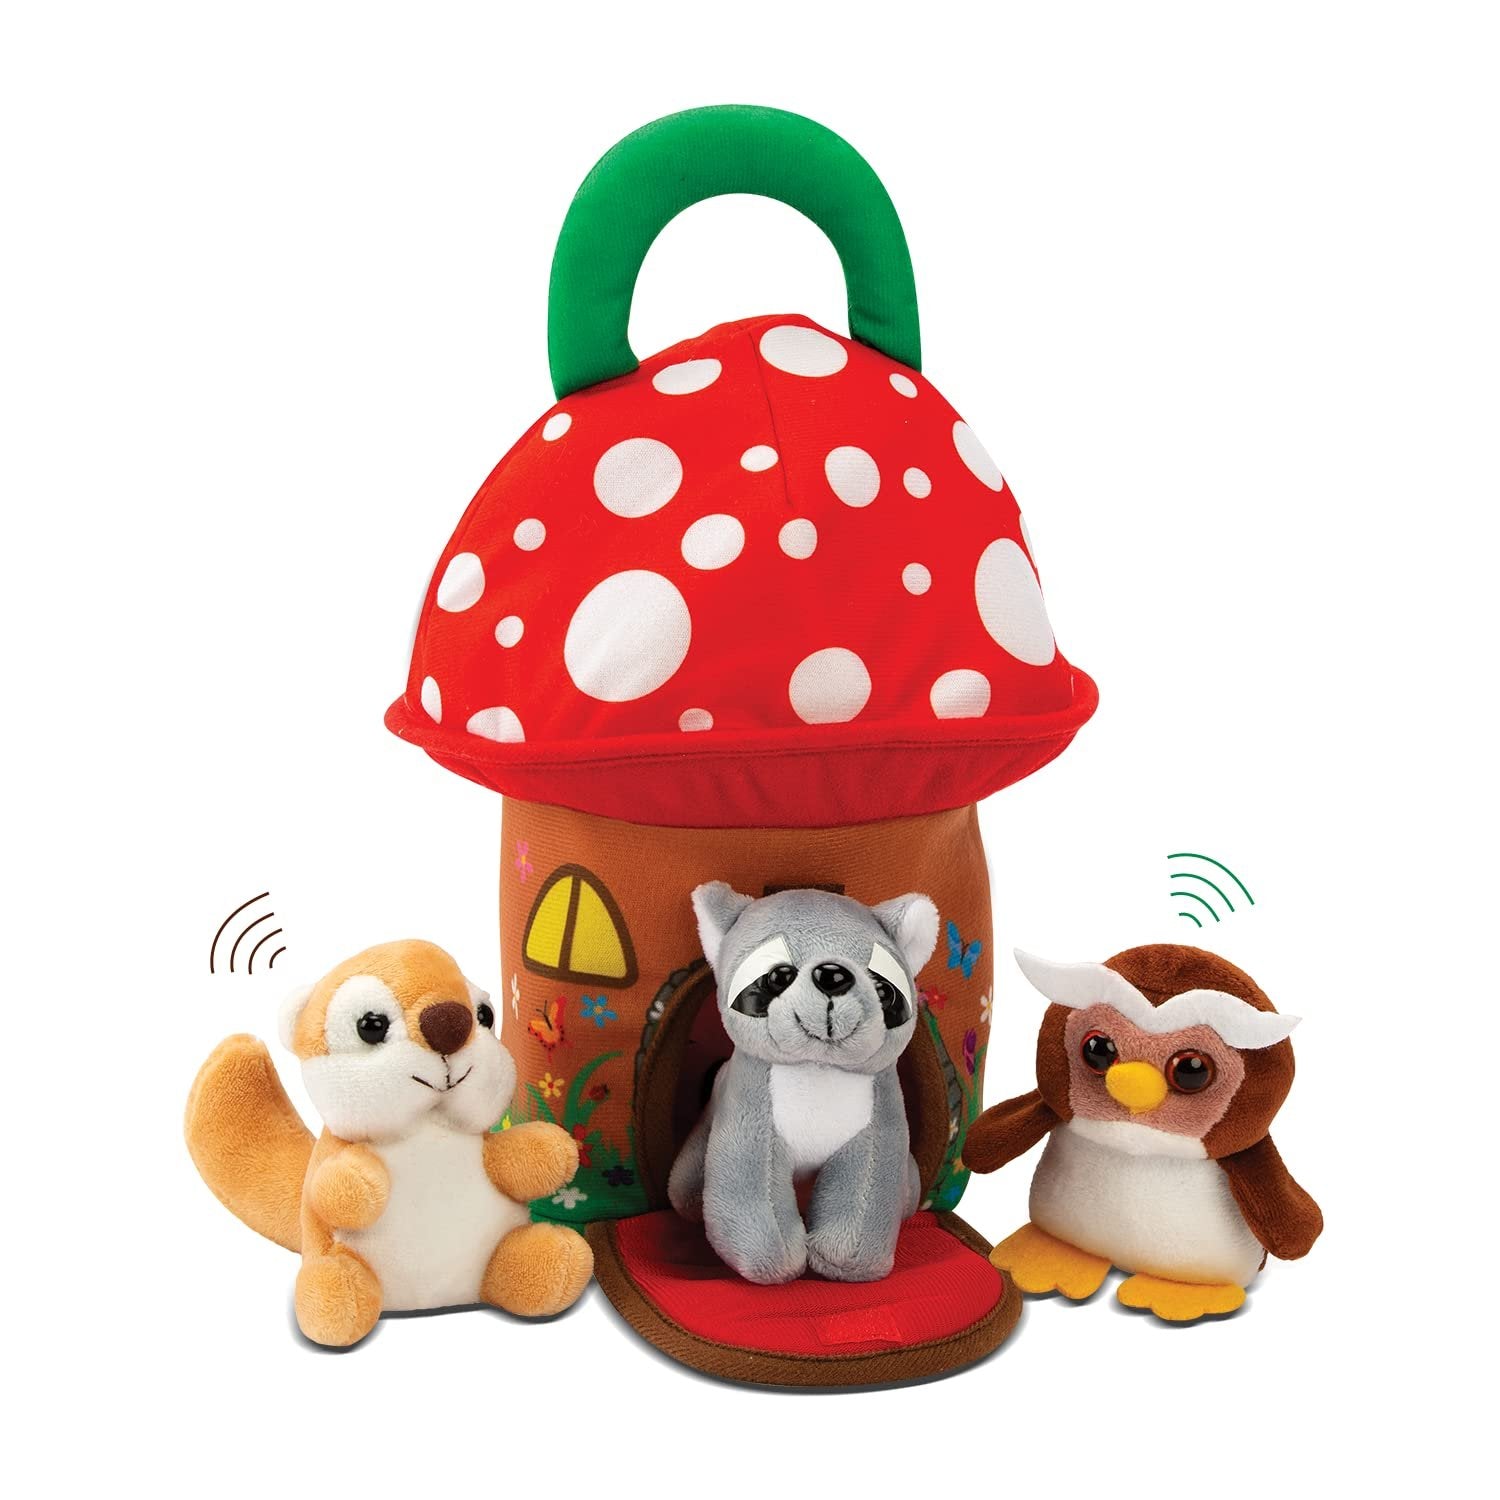 Bundaloo Plush Forest Animal Toys with Sounds - Plushie Play Set with Cute Talking Forest Animals in a Mushroom Cottage Carrier